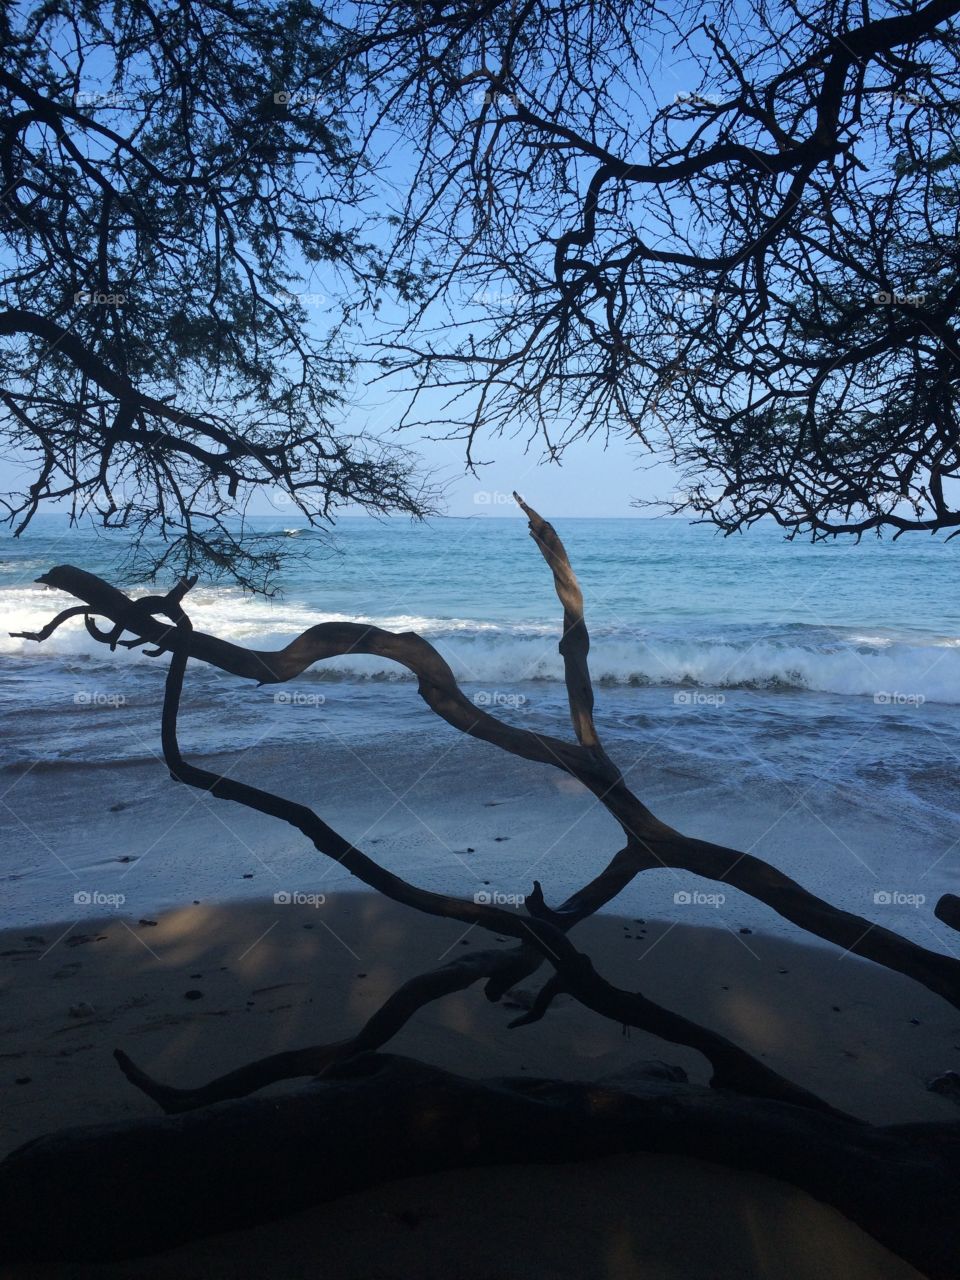 A Hawaiian beach, with the ocean and its waves seen through branches.